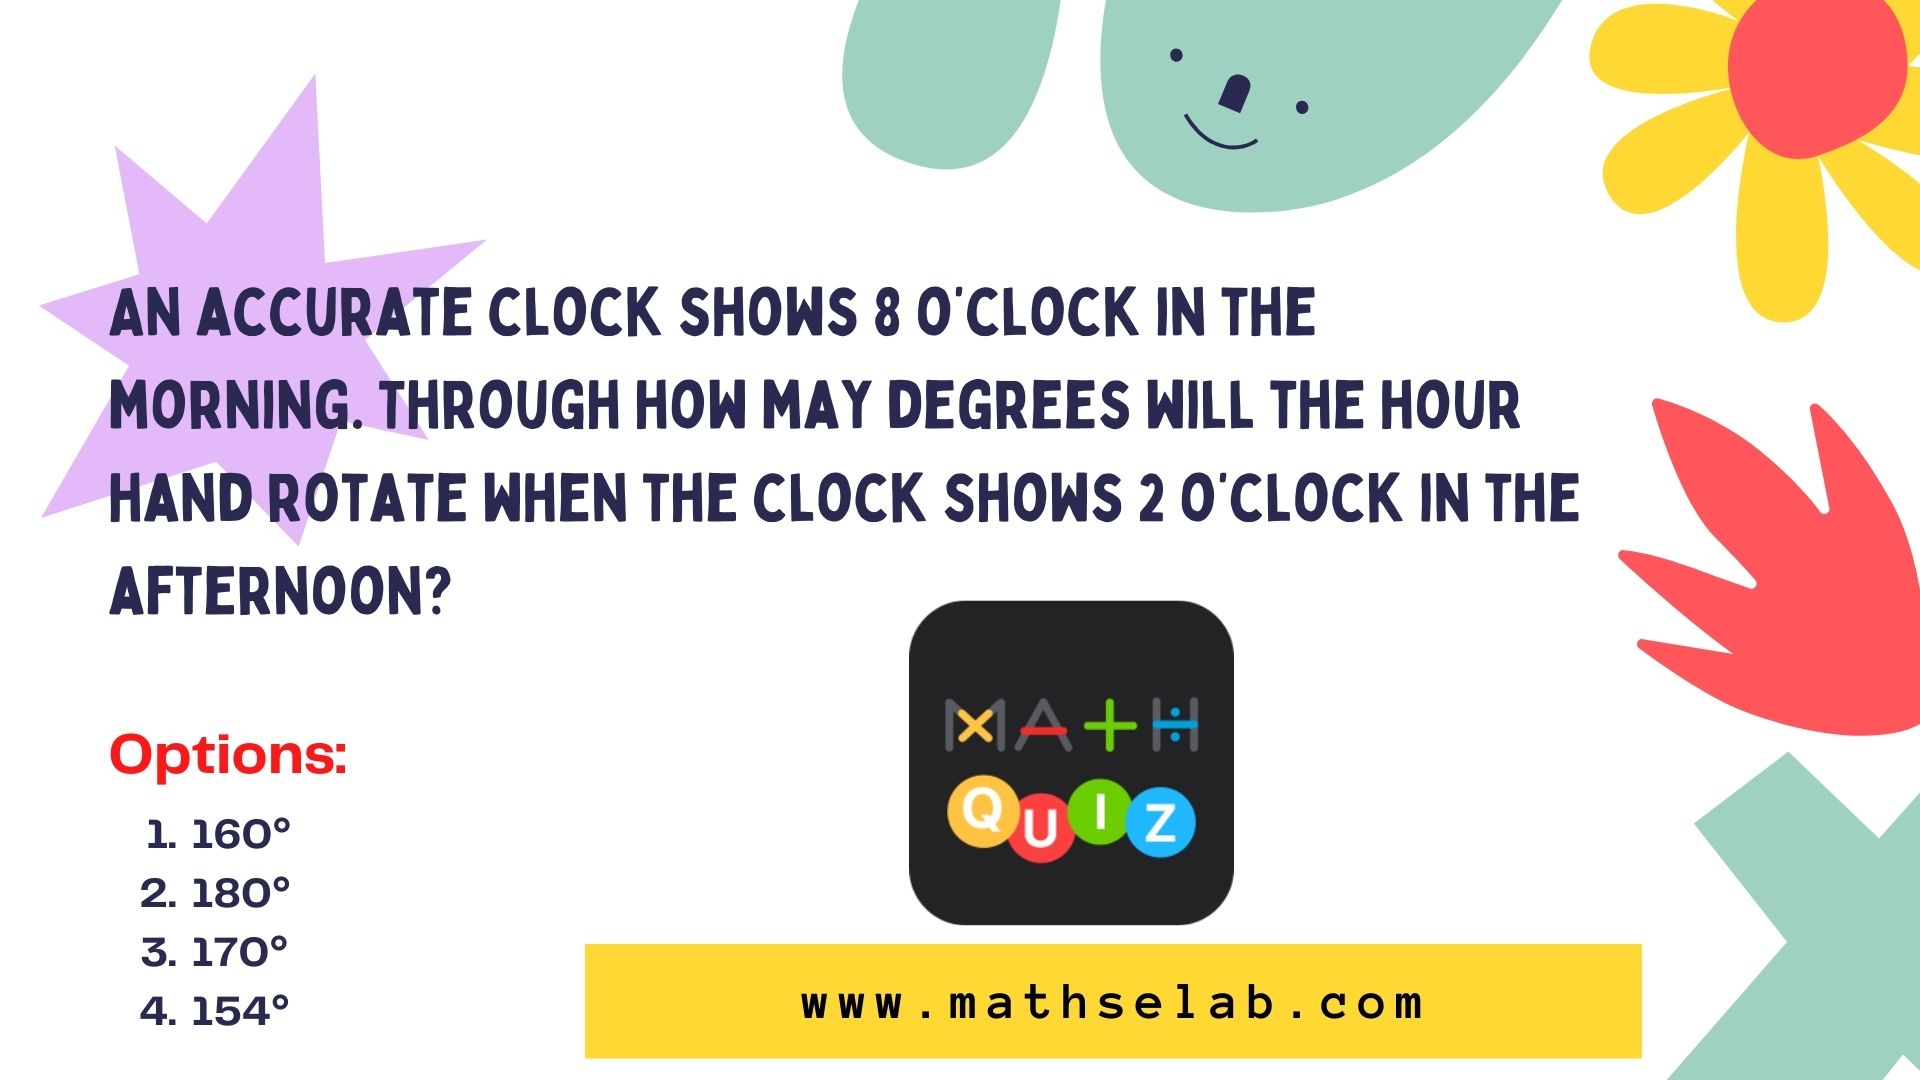 An accurate clock shows 8 o’clock in the morning. Through how may degrees will the hour hand rotate when the clock shows 2 o’clock in the afternoon? - mathselab.com